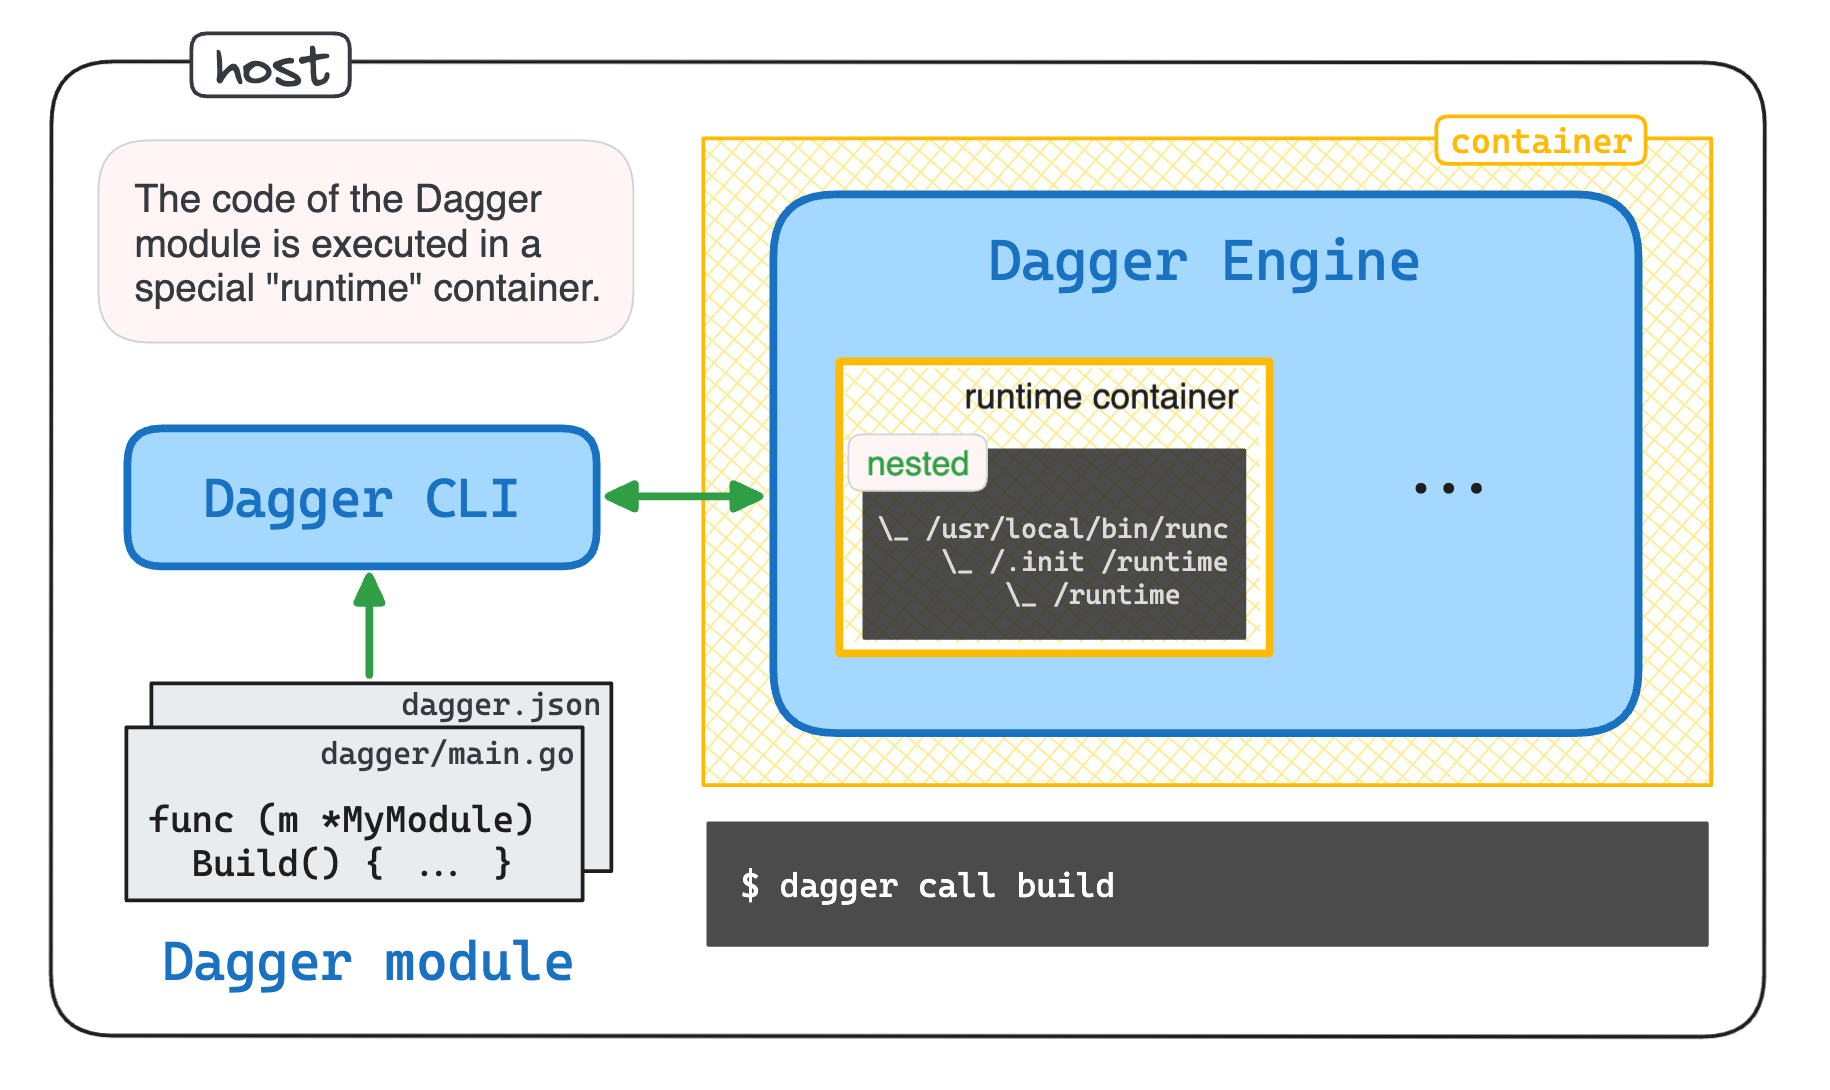 The code of Dagger modules is executed in special runtime containers.